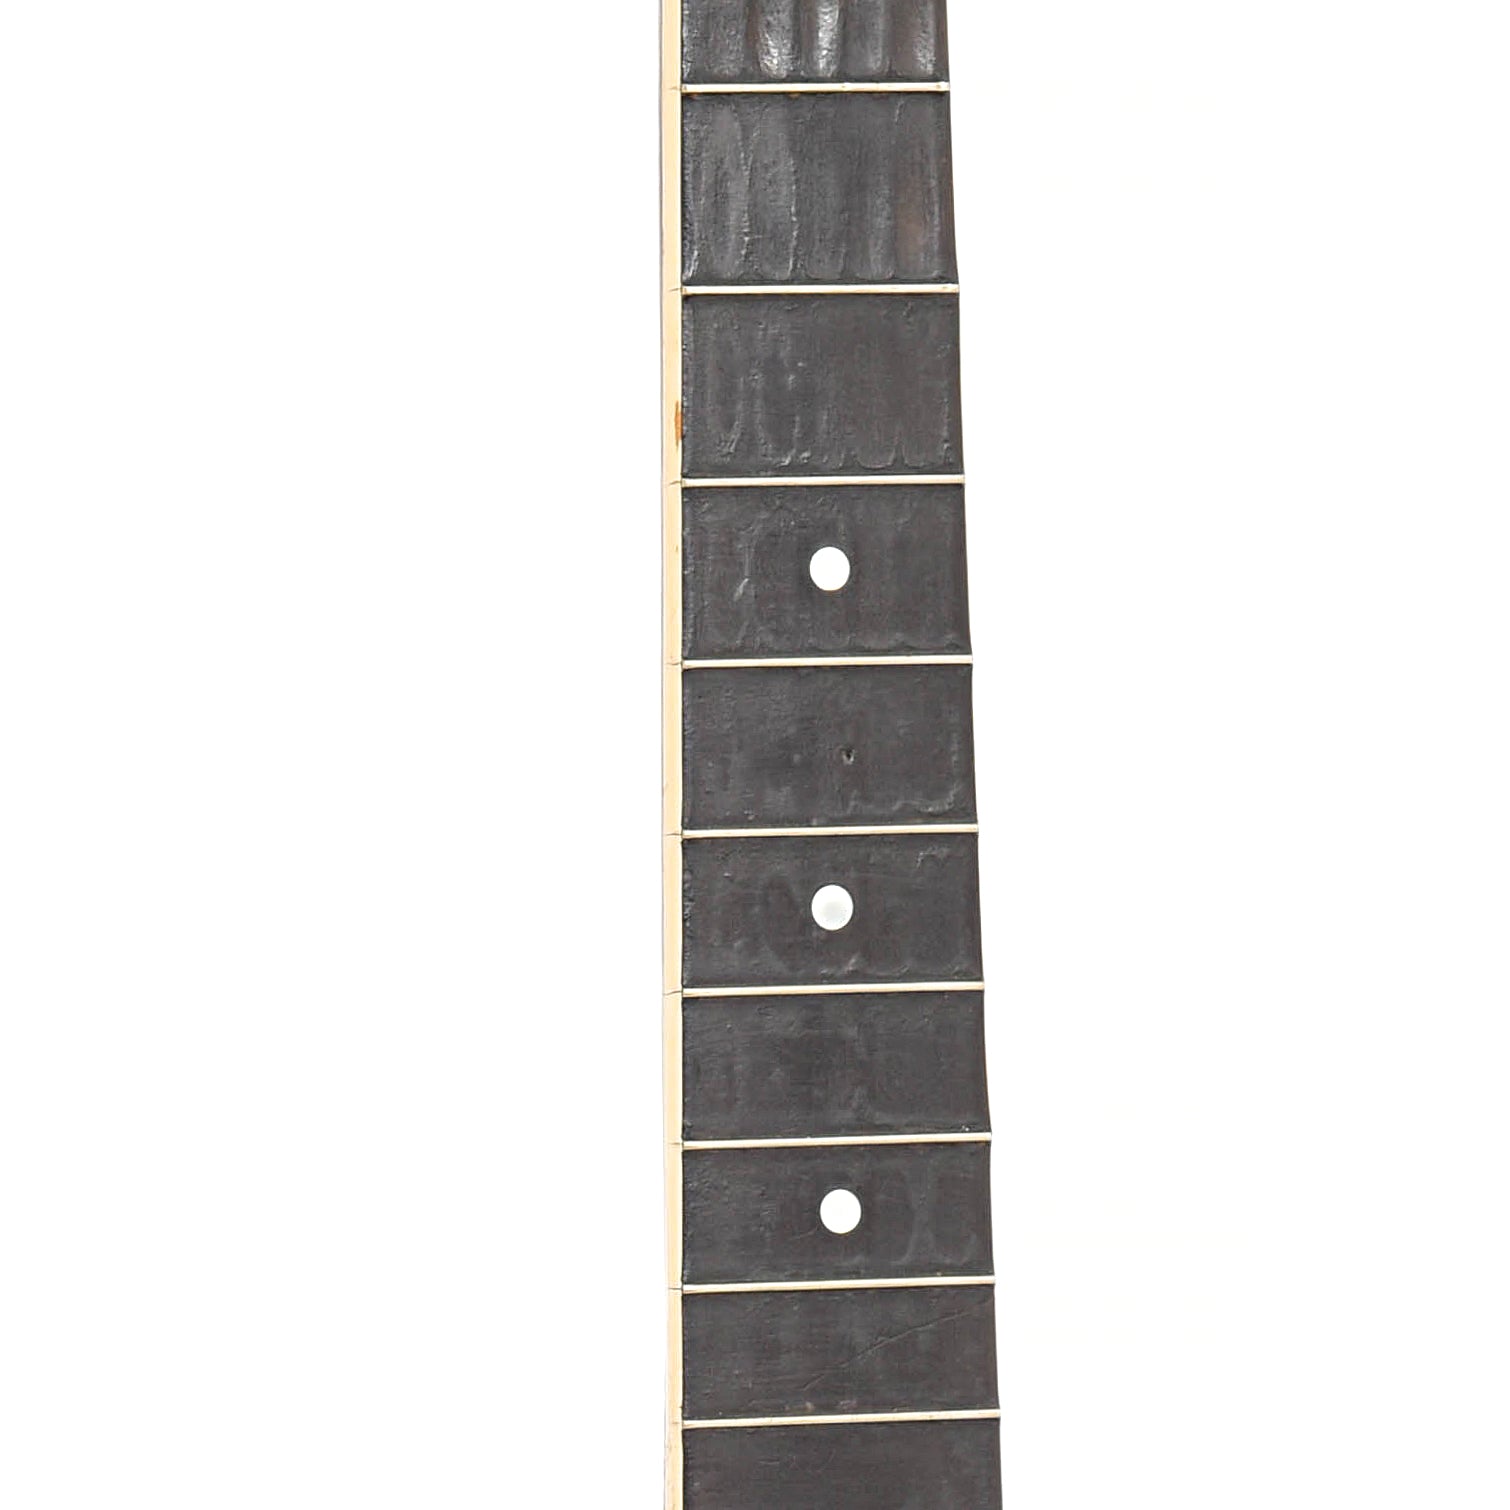 Fretboard of Gibson L-1 Archtop Acoustic